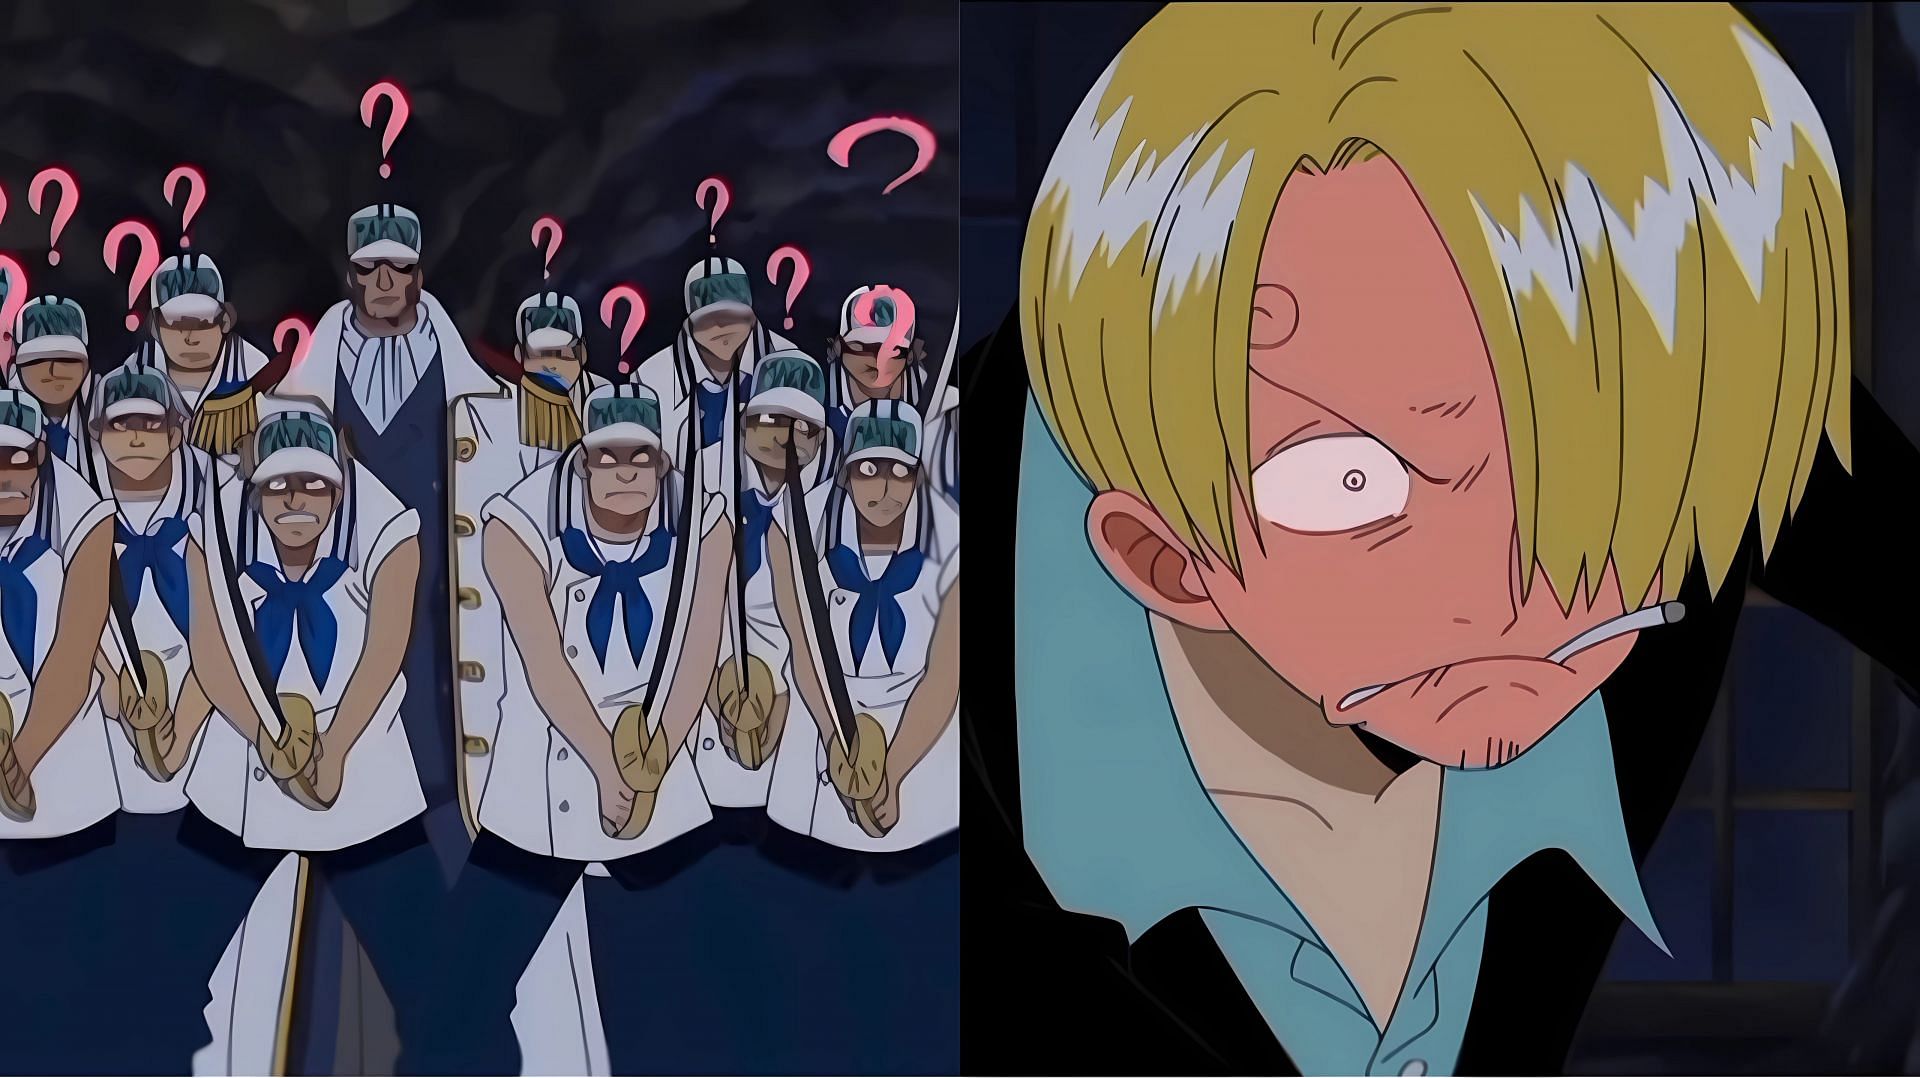 The Marines confused (left) and Sanji embarrassed (right) (Image via Toei Animation)